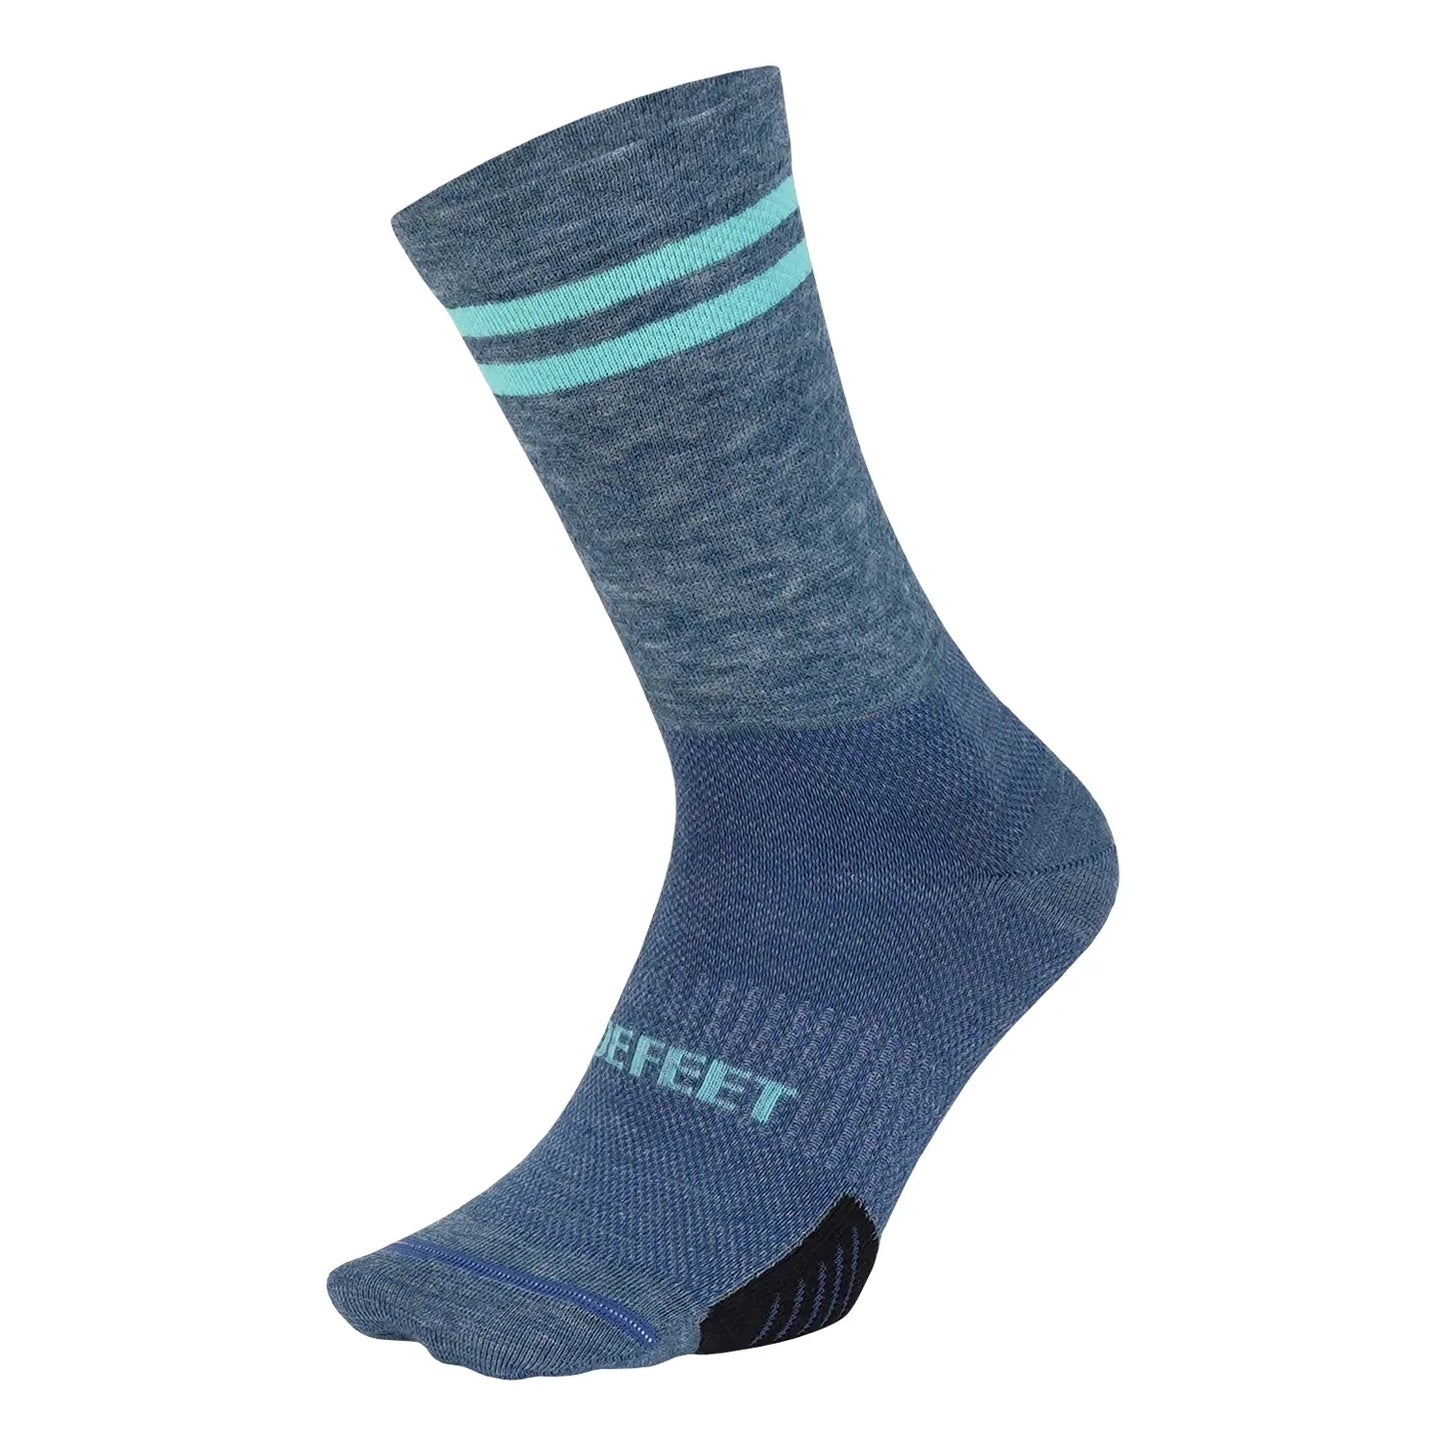 merino wool blend DeFeet cycling sock in blue with a double teal stripe on the cuff